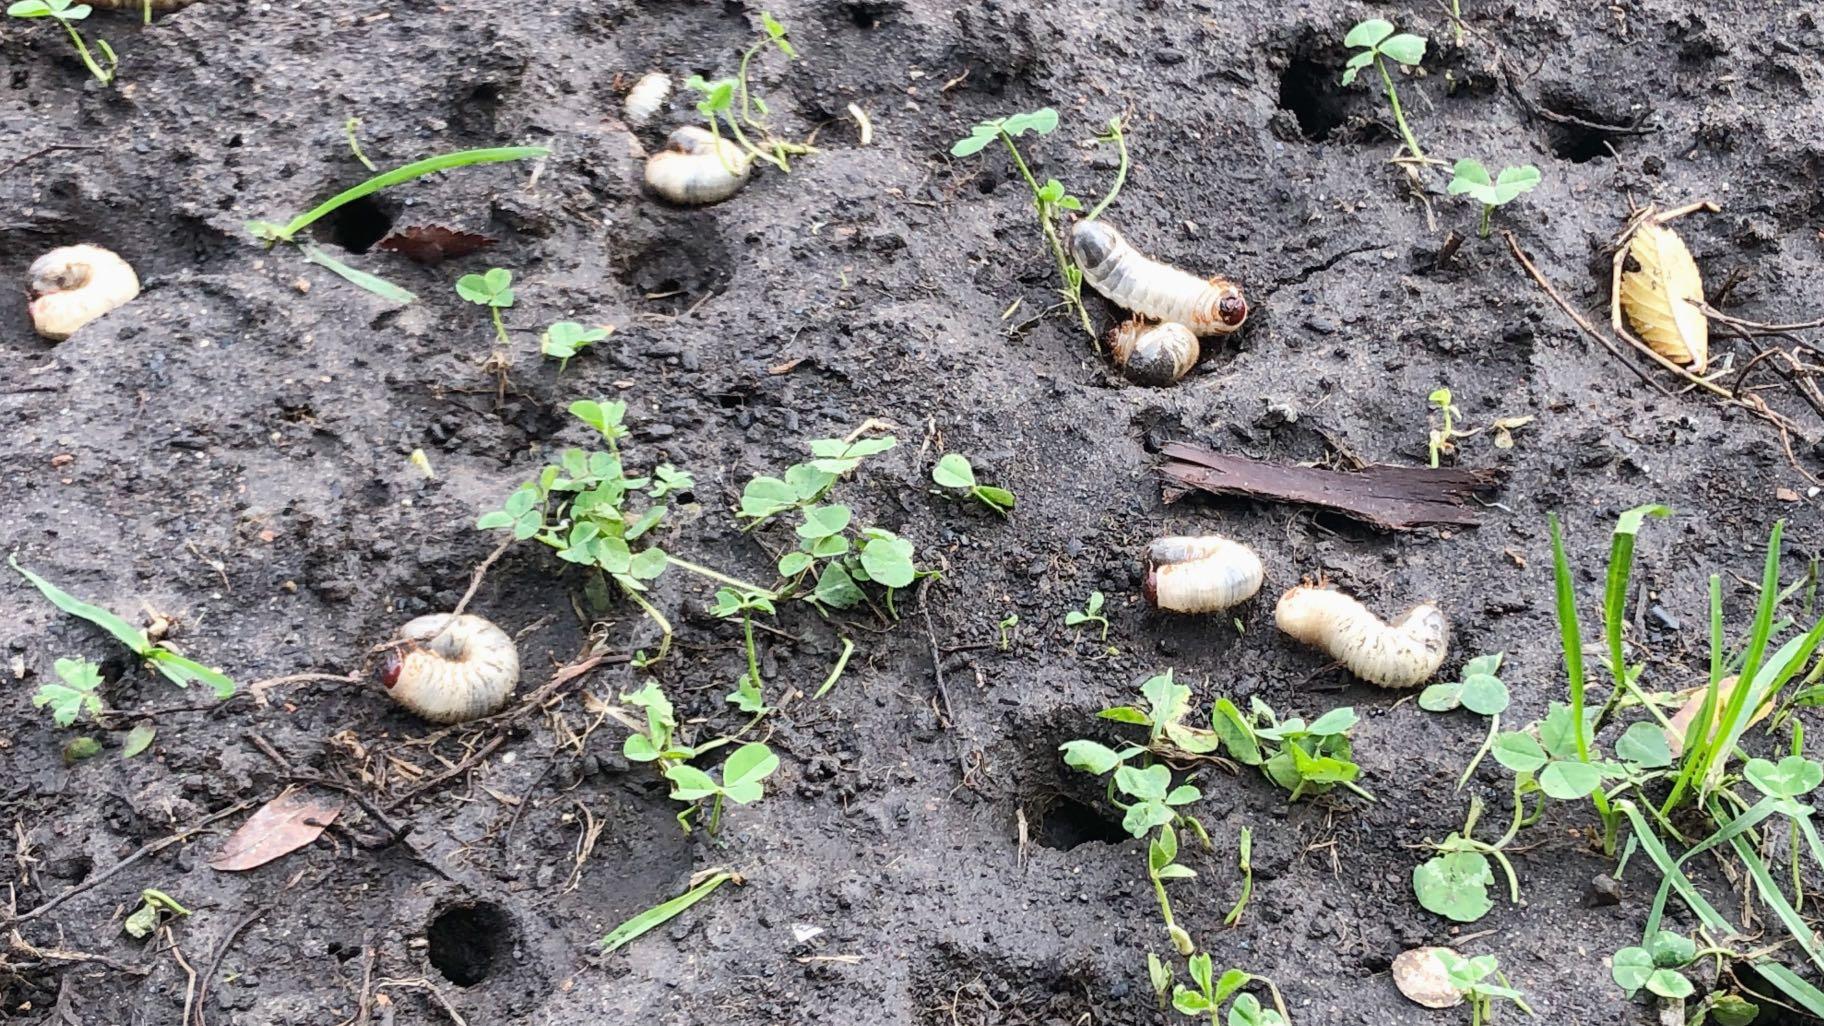 The beetle grubs that ate Welles Park have been dispatched with insecticidal efficiency. (Patty Wetli / WTTW News)